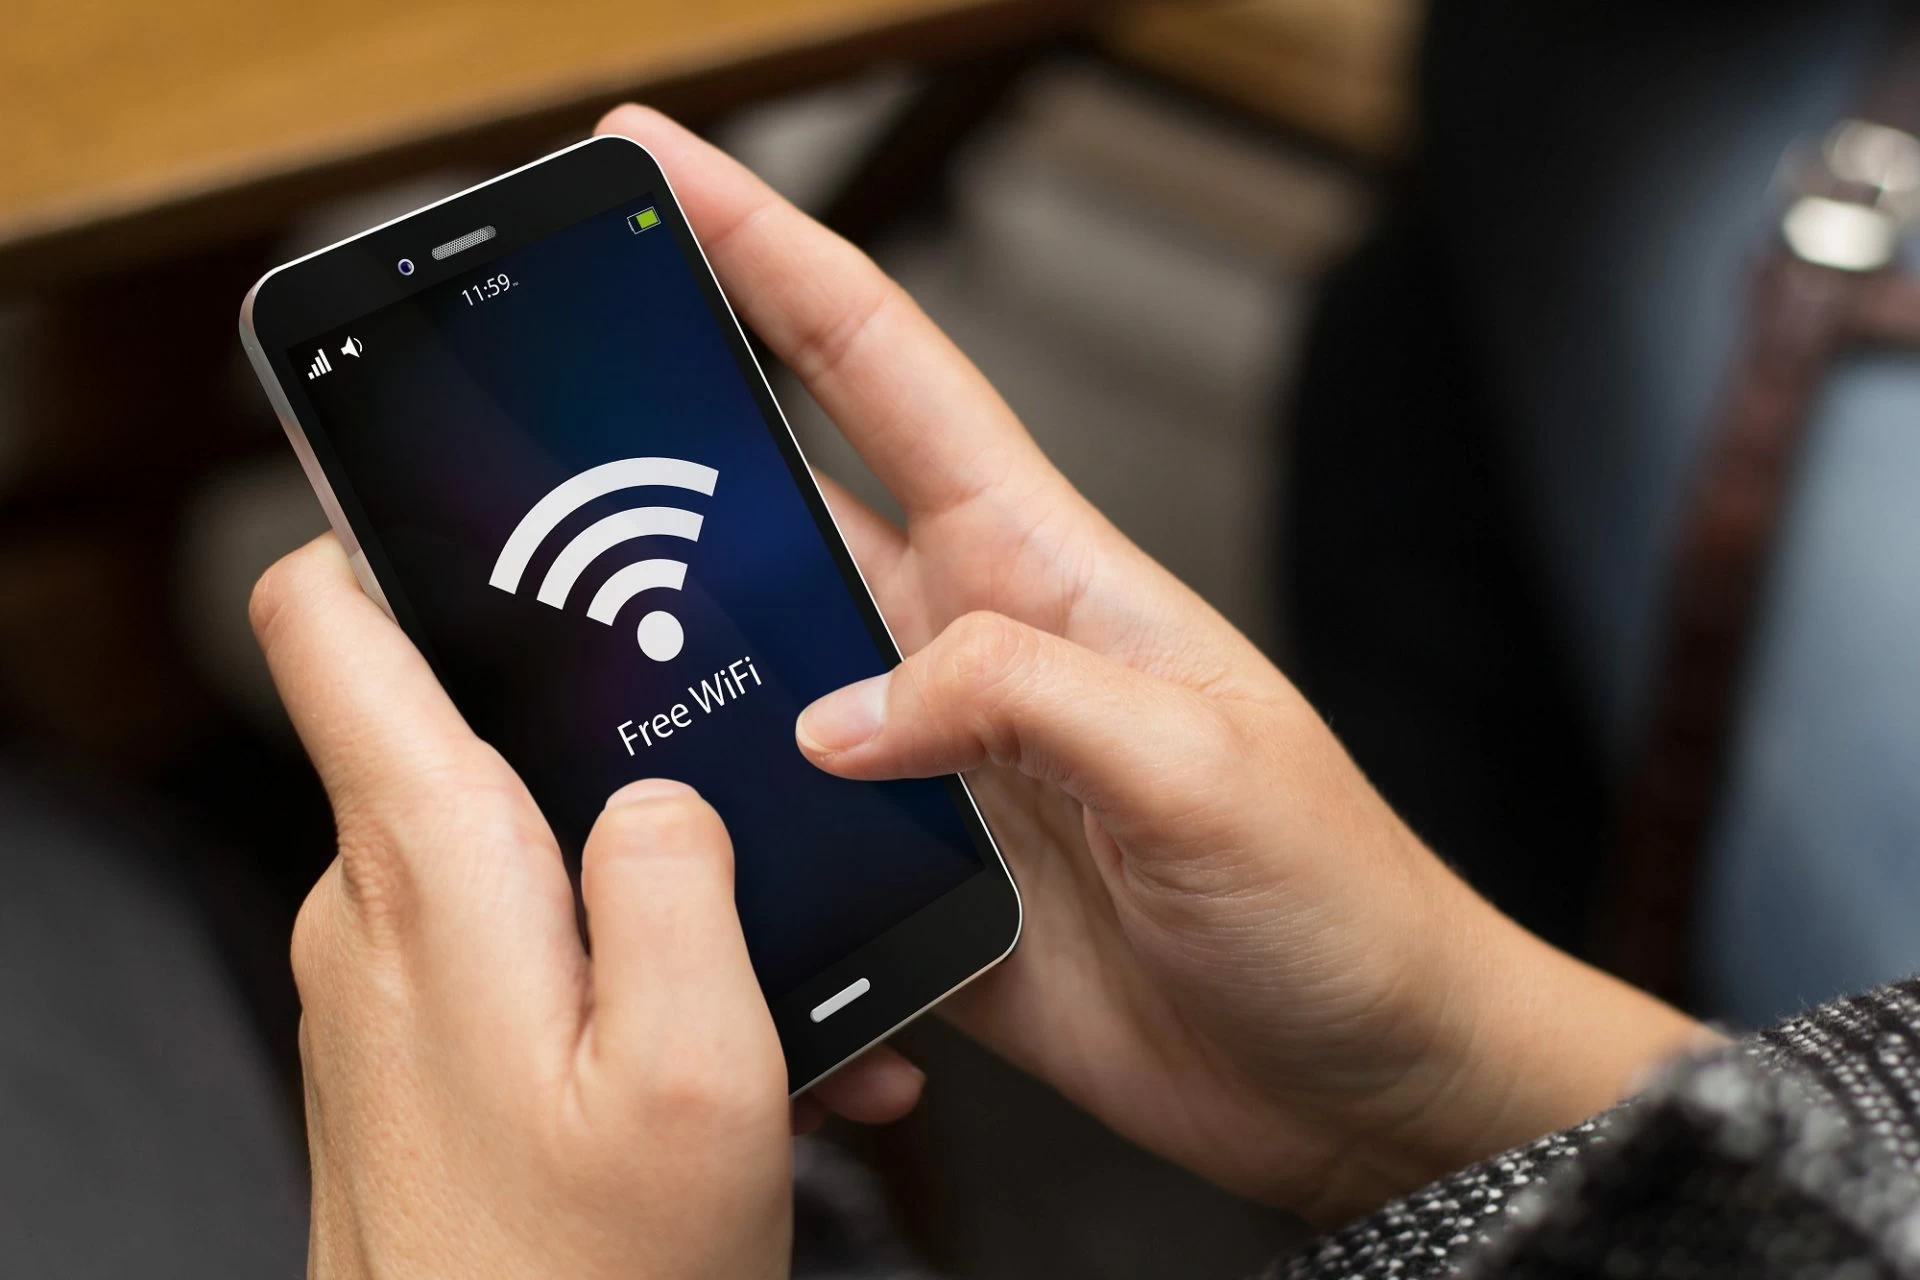 8 ways to fix problems with Wi-Fi on iPhone or iPad